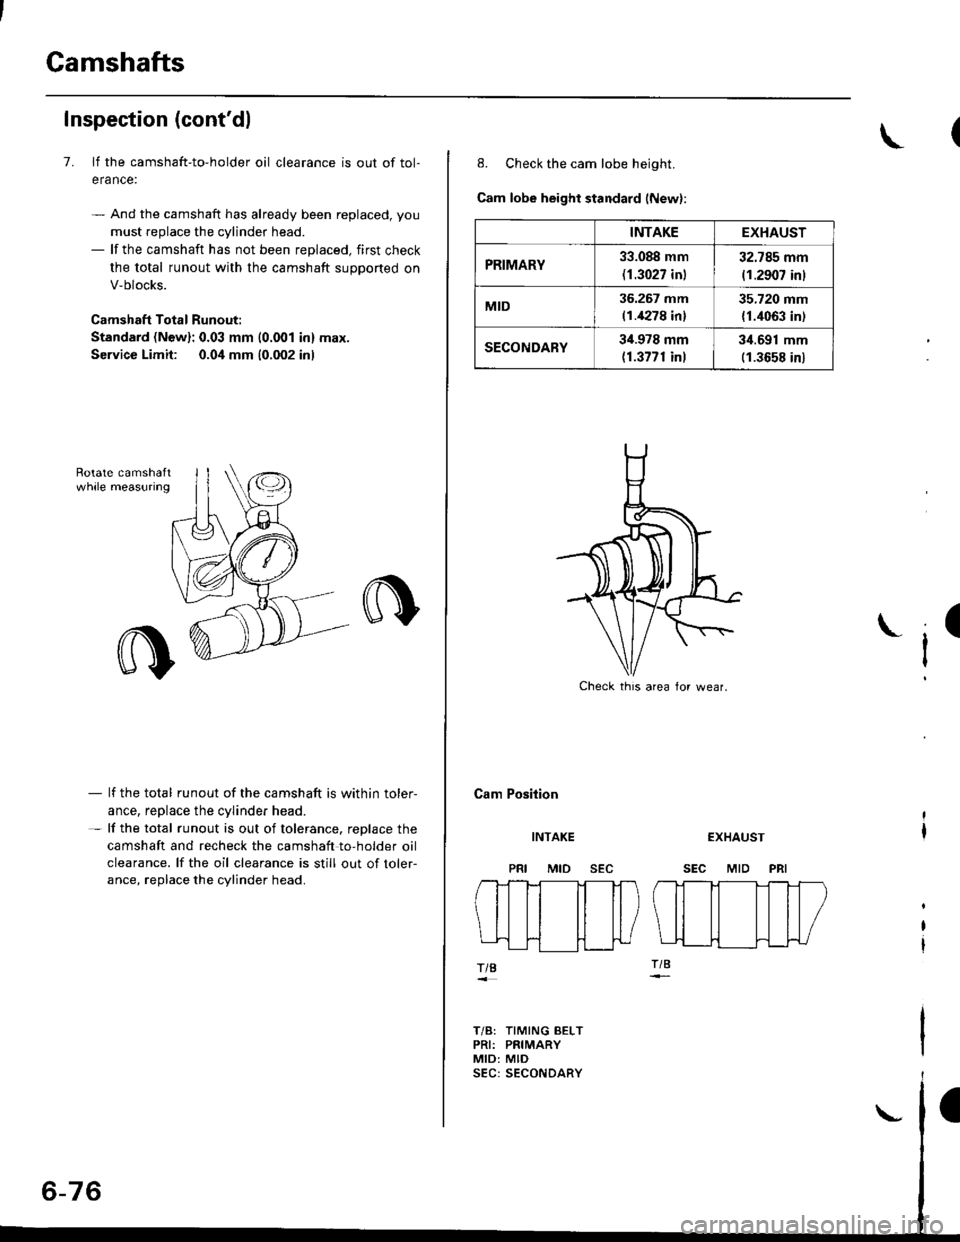 HONDA CIVIC 2000 6.G Owners Guide Gamshafts
Inspection (contdl
7. lf the camshaft-to-holder oil clearance is out of tol-
erance:
- And the camshaft has already been replaced, you
must replace the cylinder head.- lf the camshaft has n